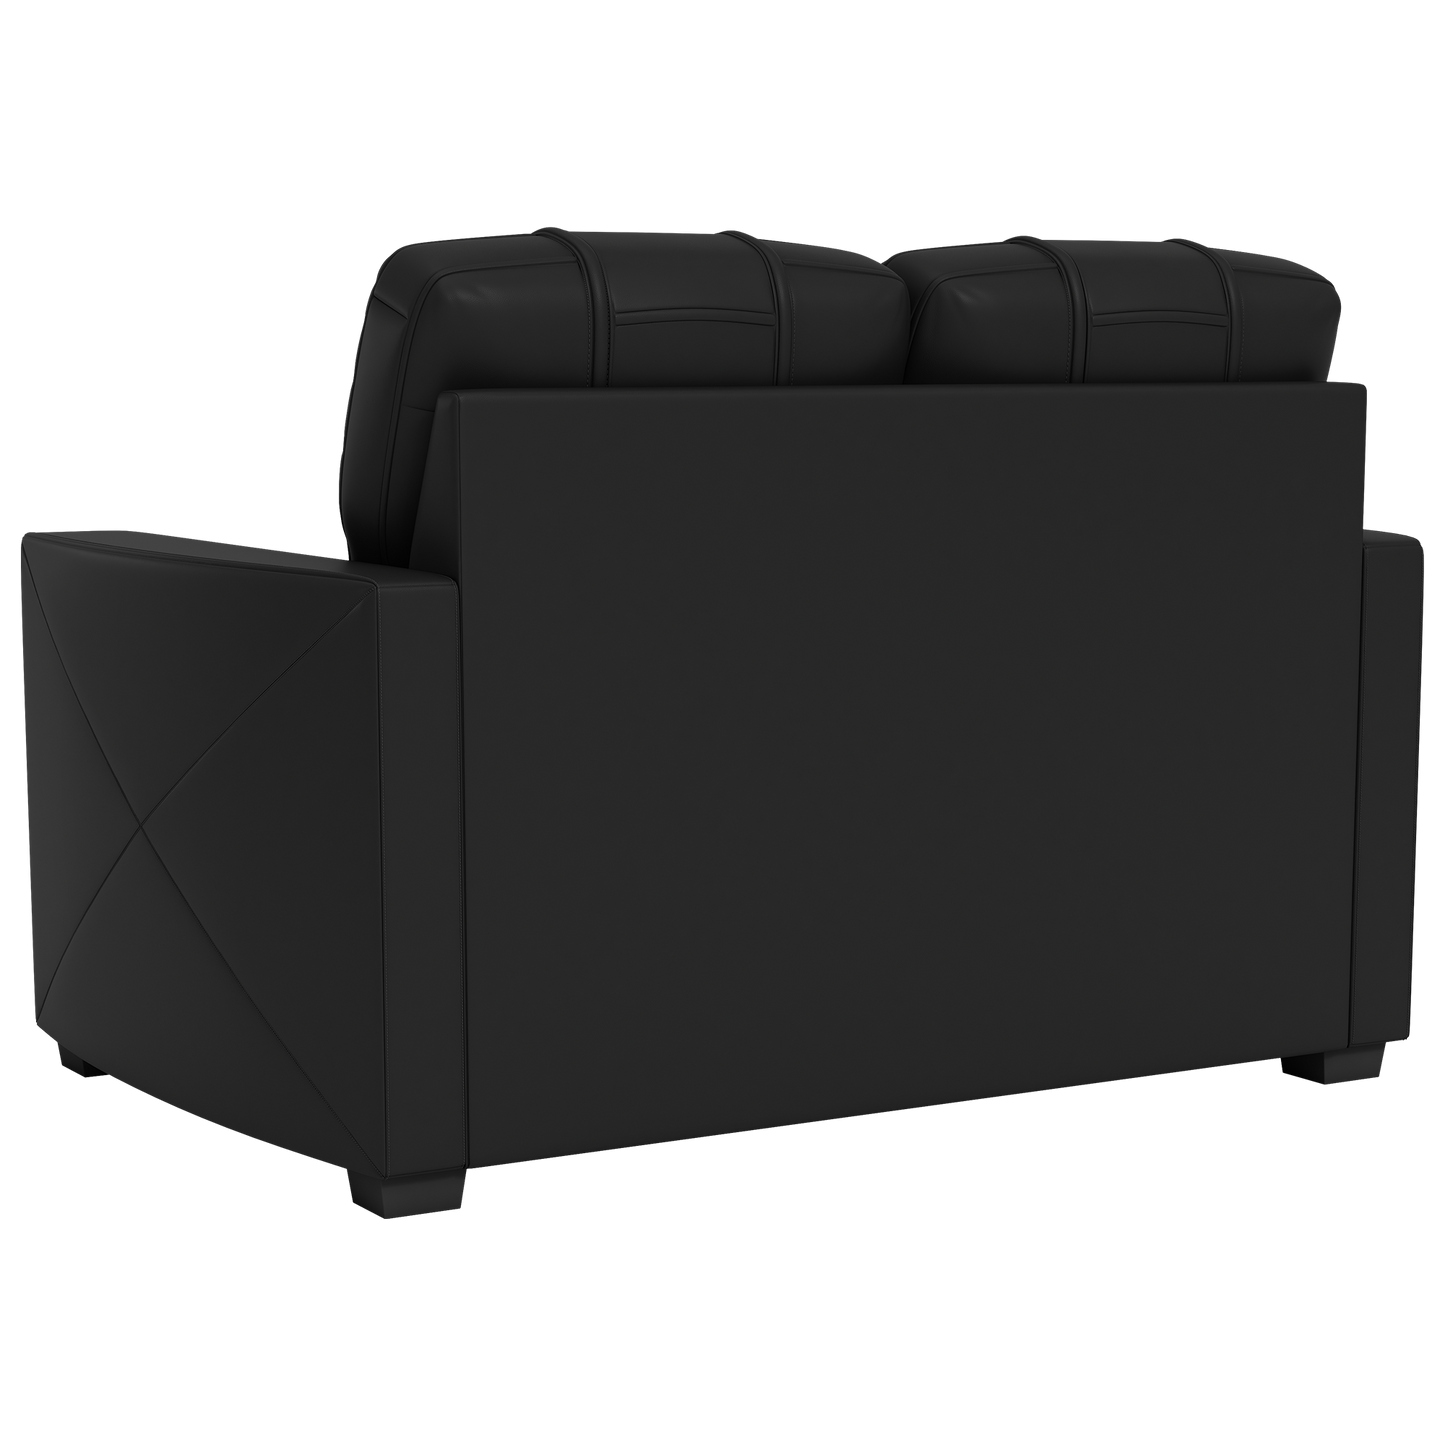 Silver Loveseat with Memphis Grizz Gaming Logo